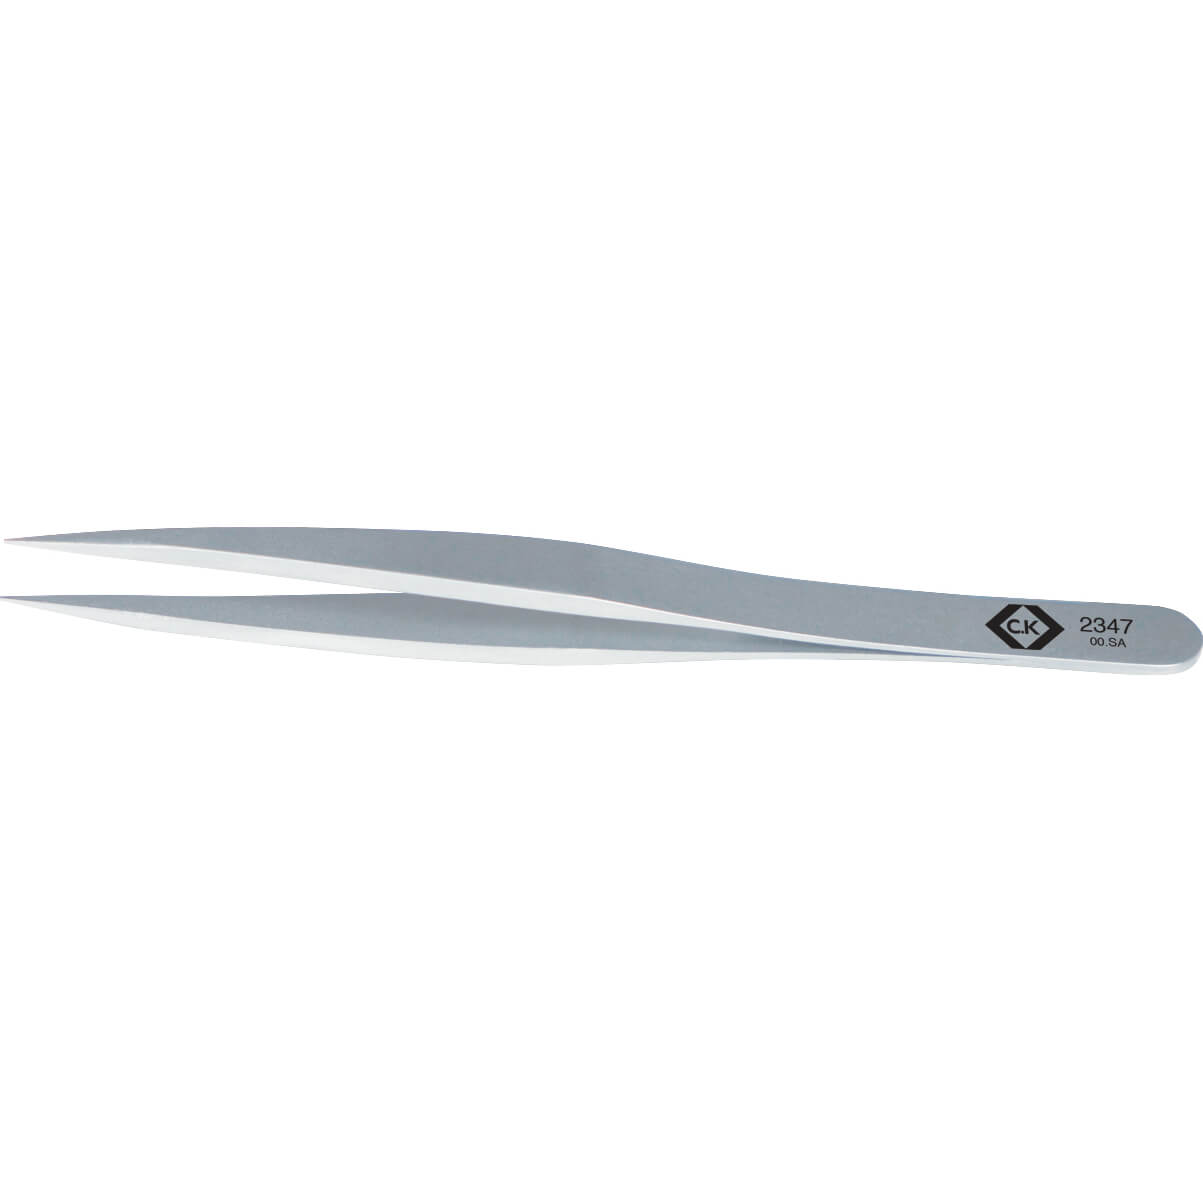 Image of CK Precision Tweezers Thick Smooth Tips